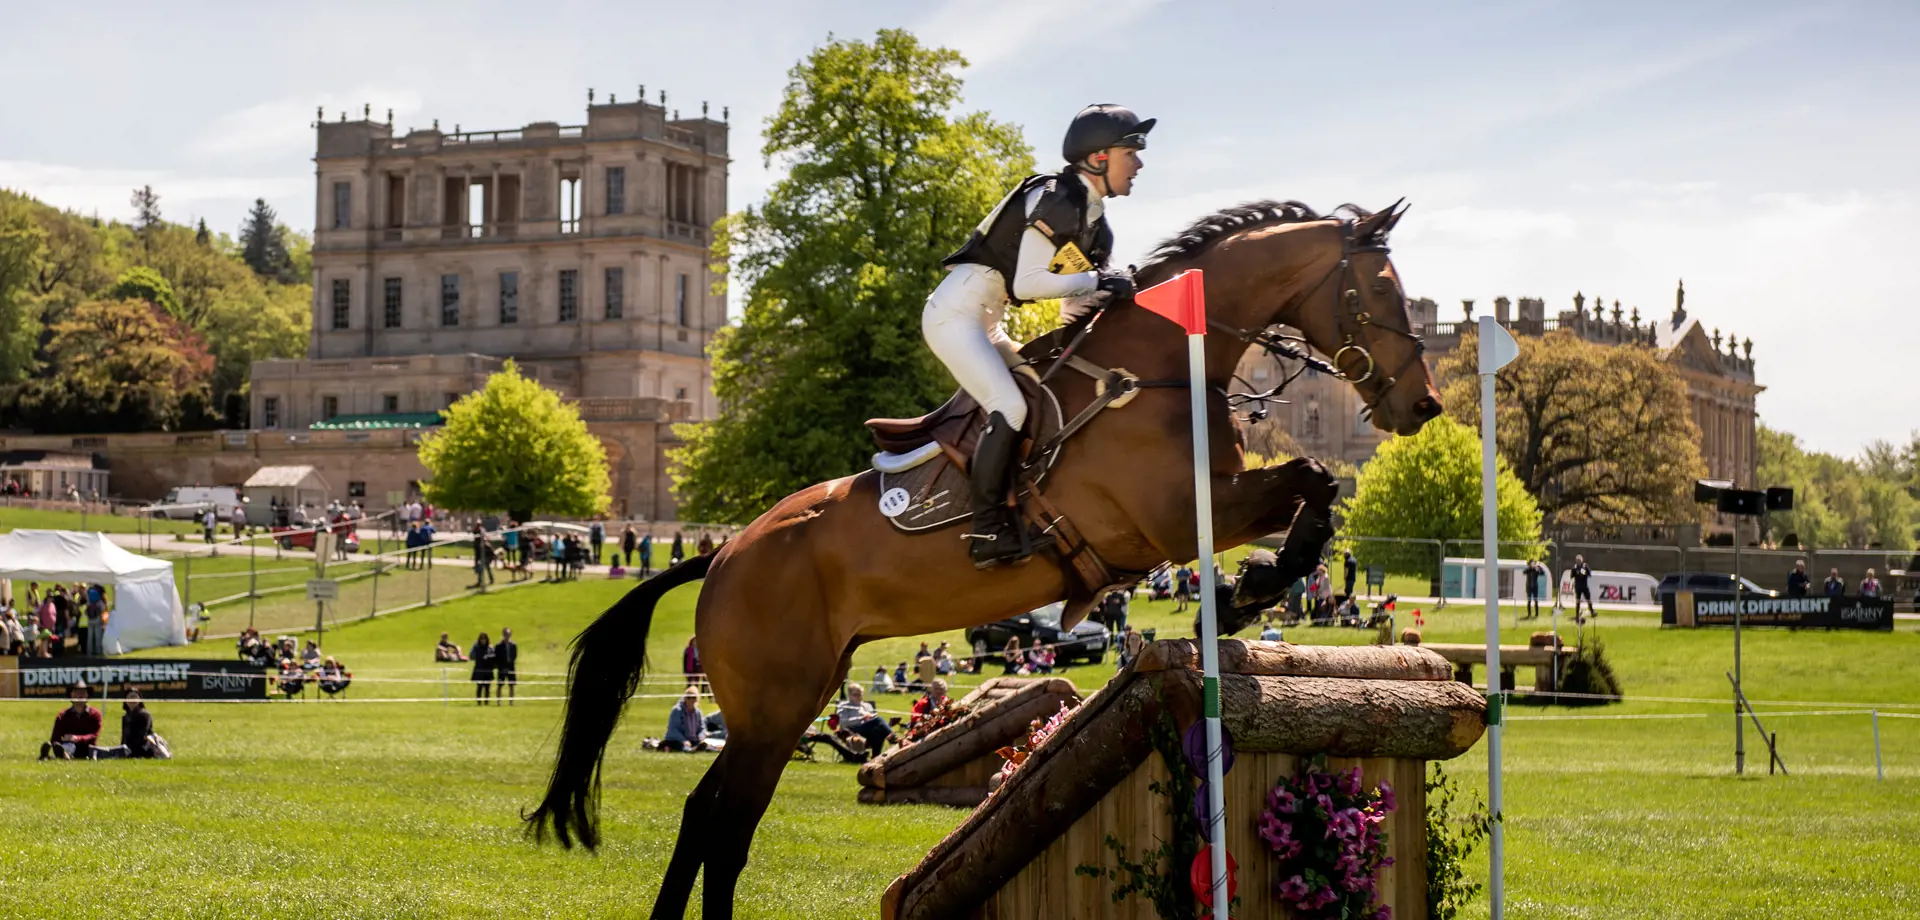 Return of Chatsworth International Horse Trials After Two Year Absence